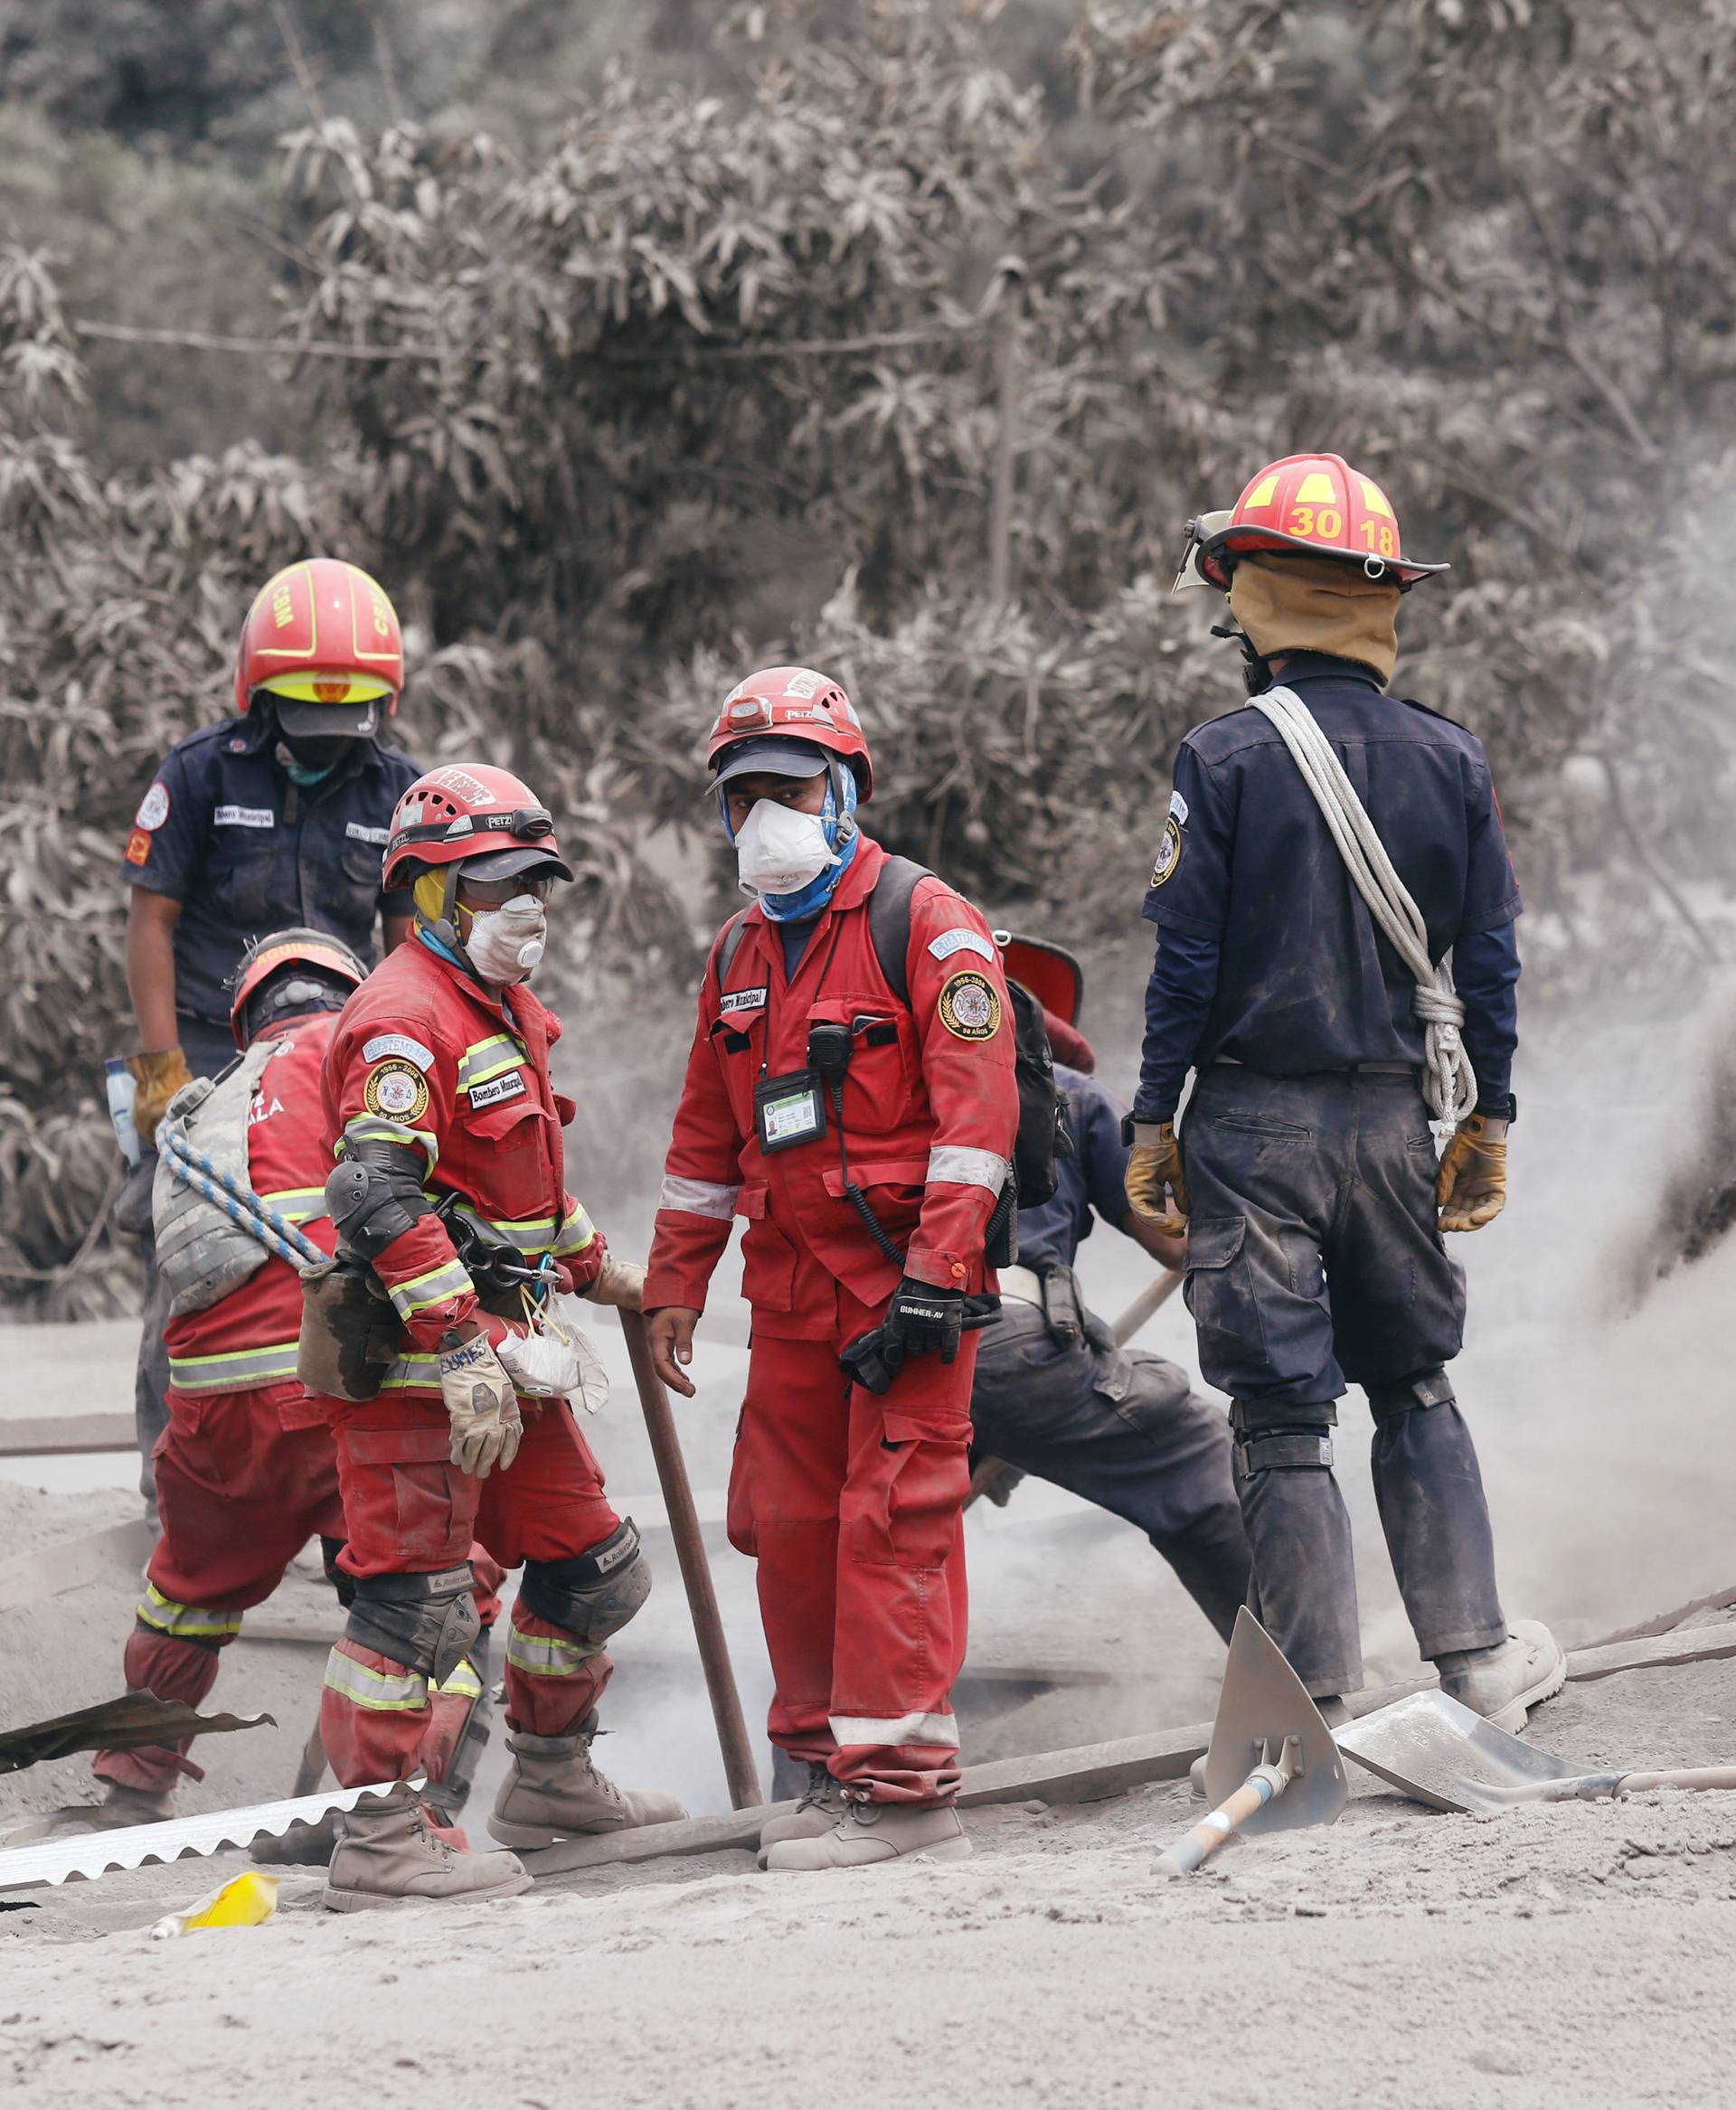 Rescue workers remove ash at an area affected by the eruption of the Fuego volcano in the community of San Miguel Los Lotes in Escuintla